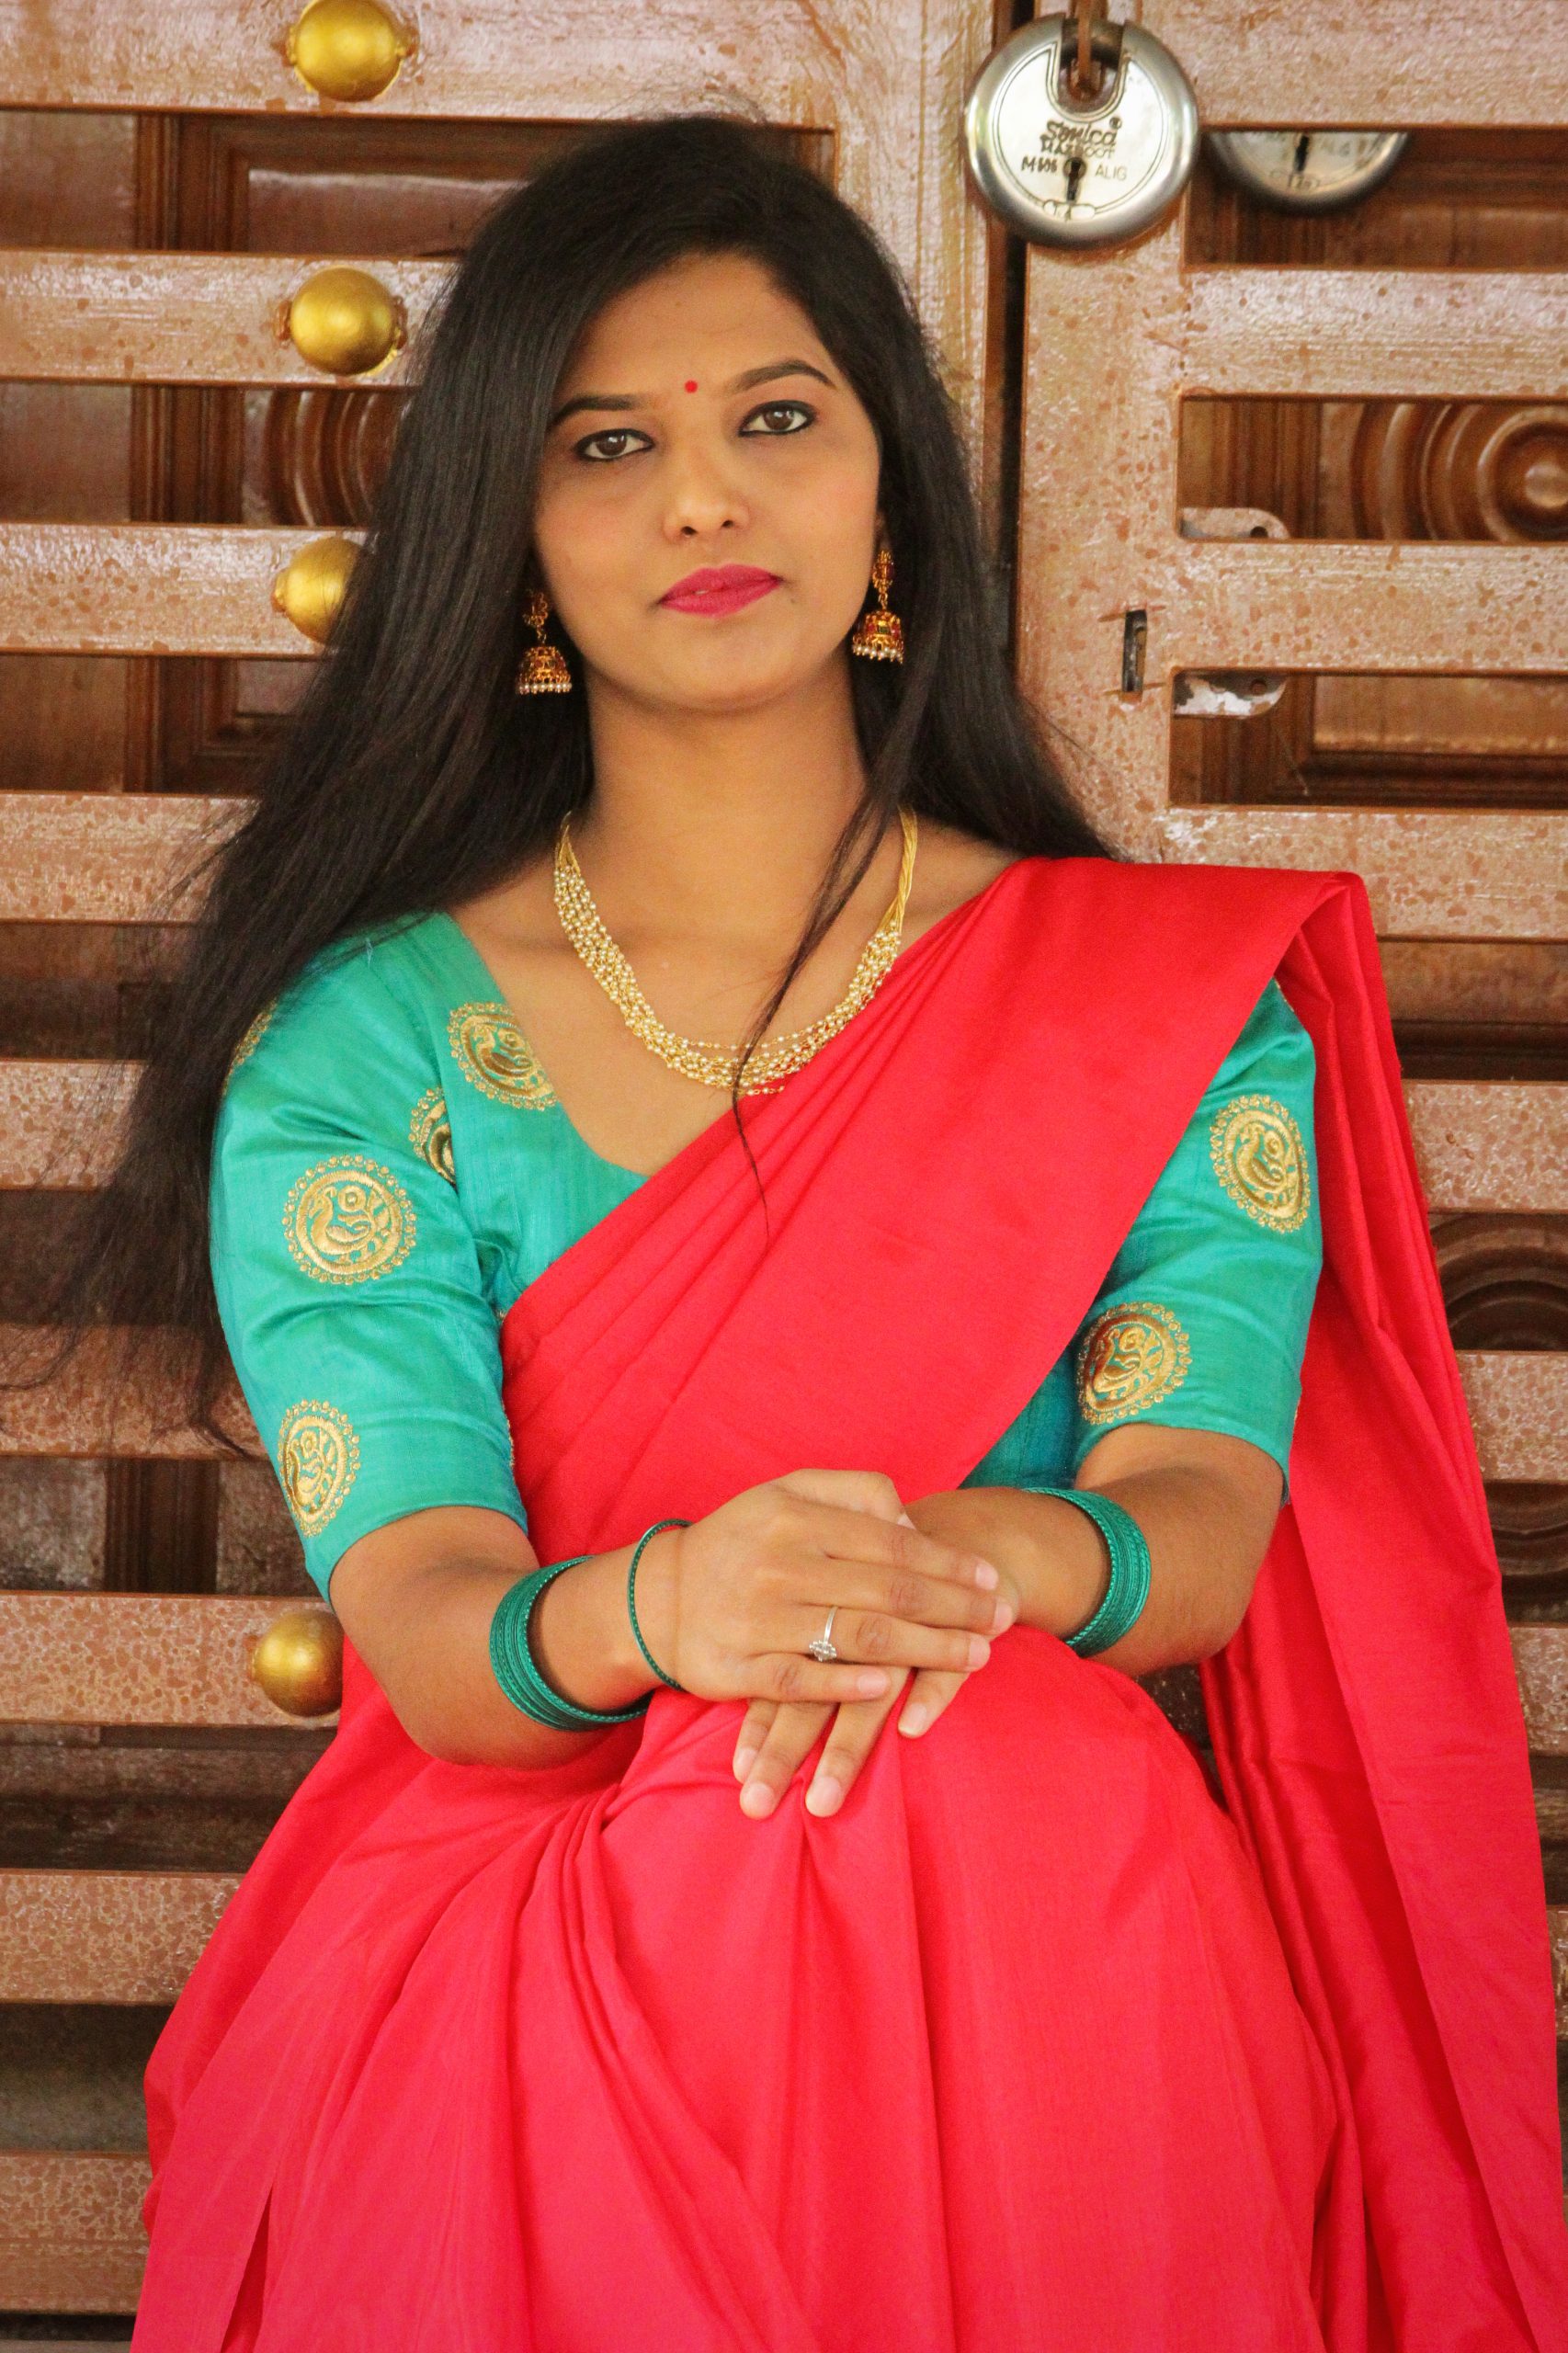 An Indian woman in red dress